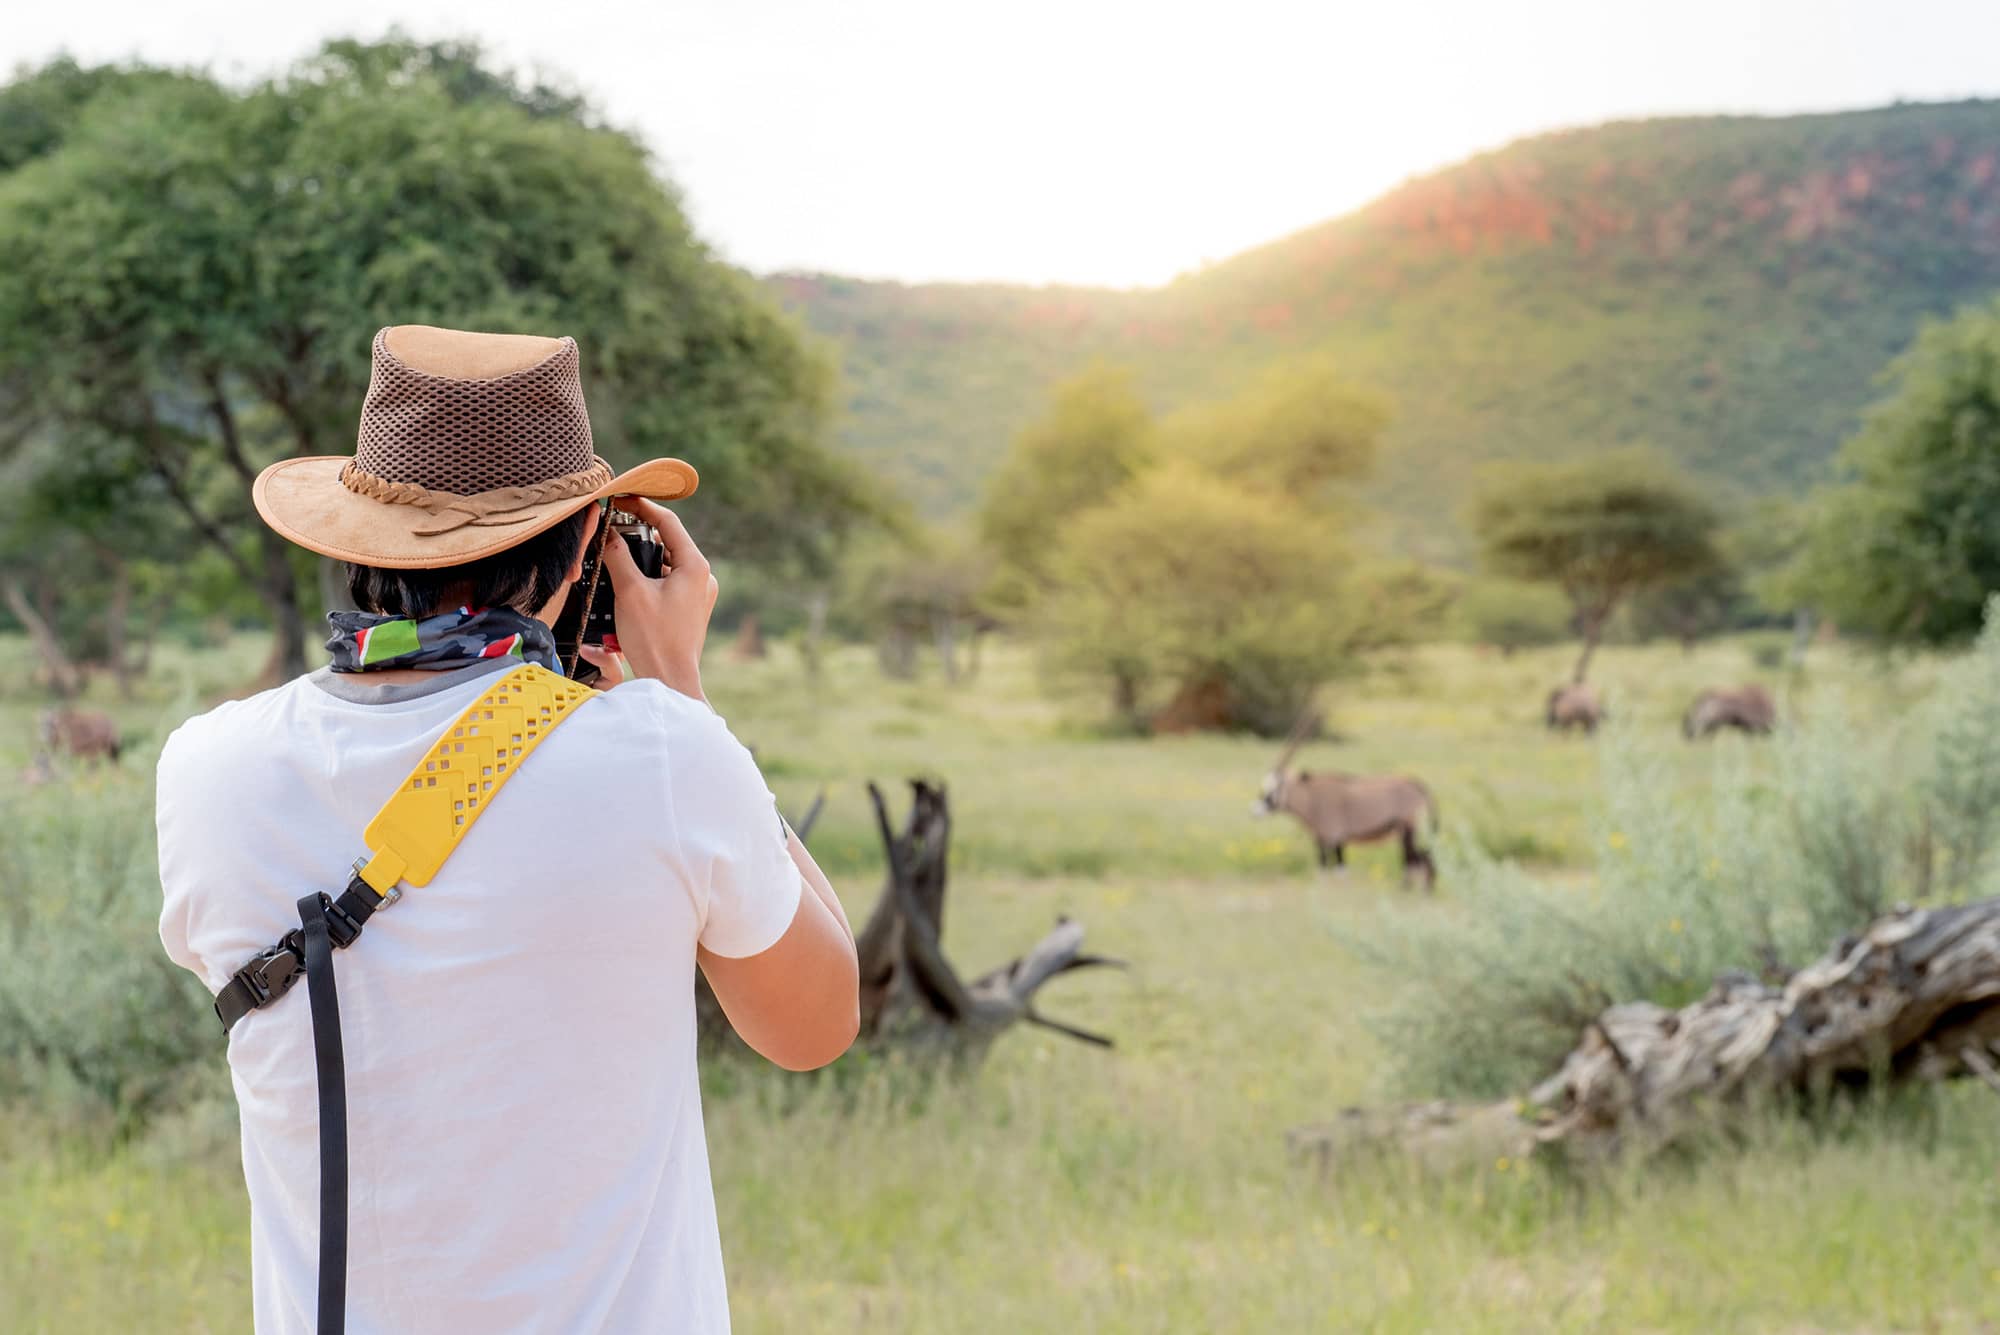 A man shoots pictures of warthogs in the wilds of Tanzania